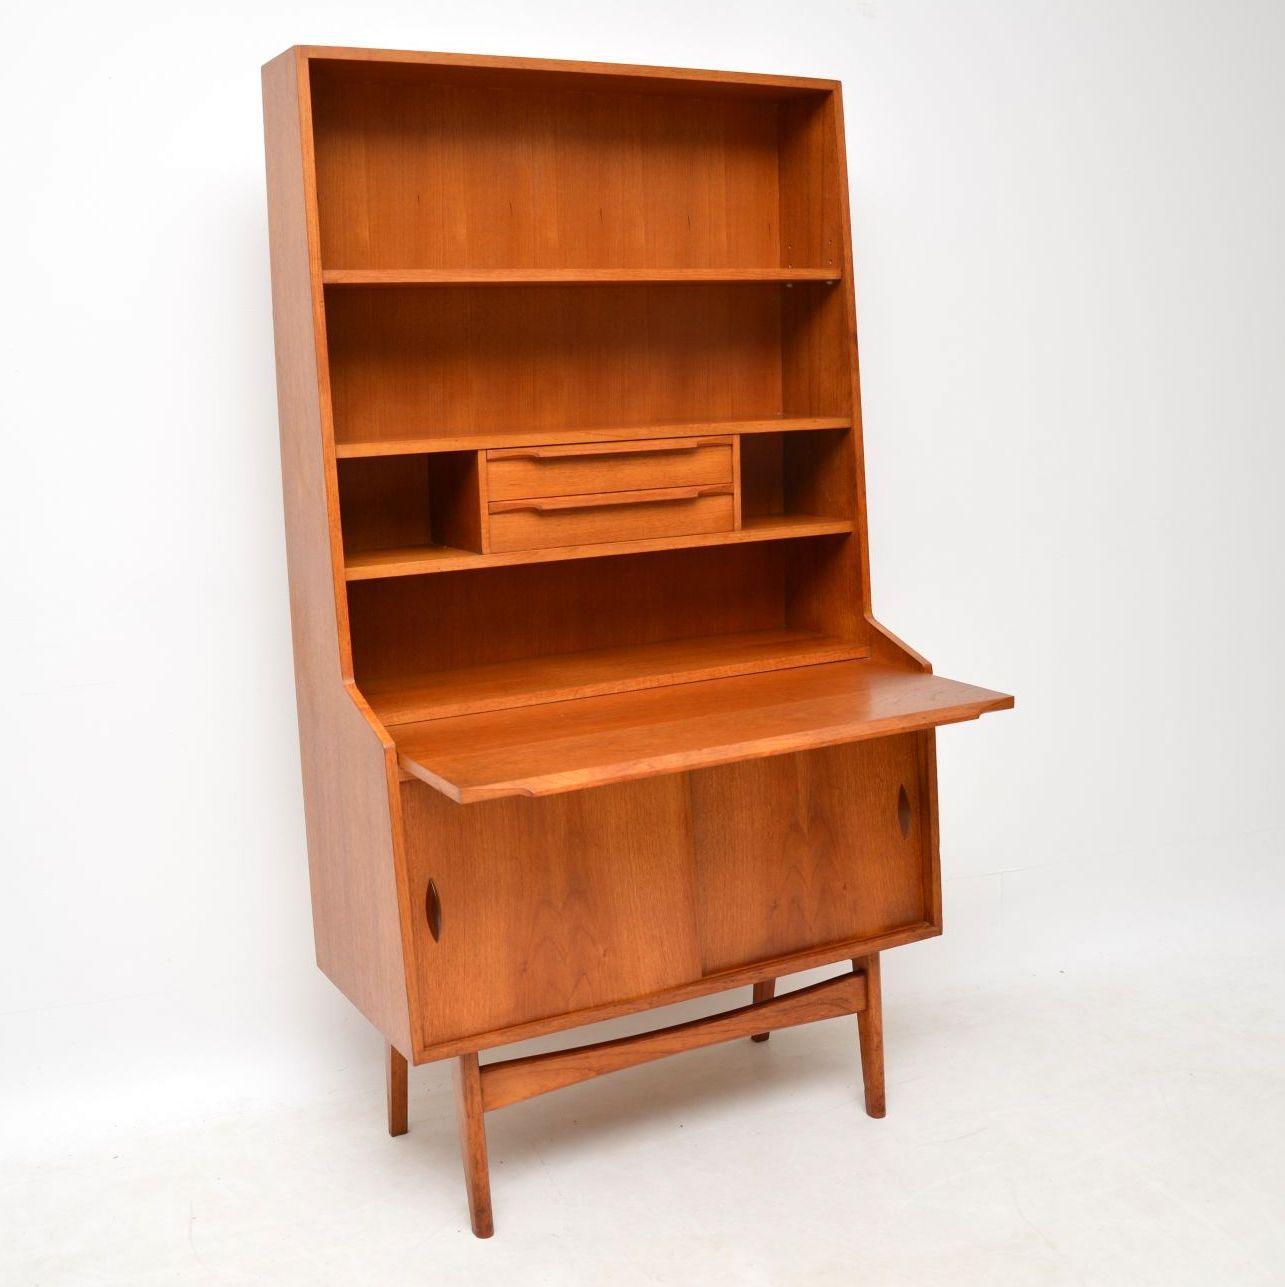 A smart, stylish and very useful bureau bookcase in teak, this dates from the 1960s. It’s extremely well made and beautifully designed, with lots of storage space and a handy pull out writing slide; everything you need in a work station. The